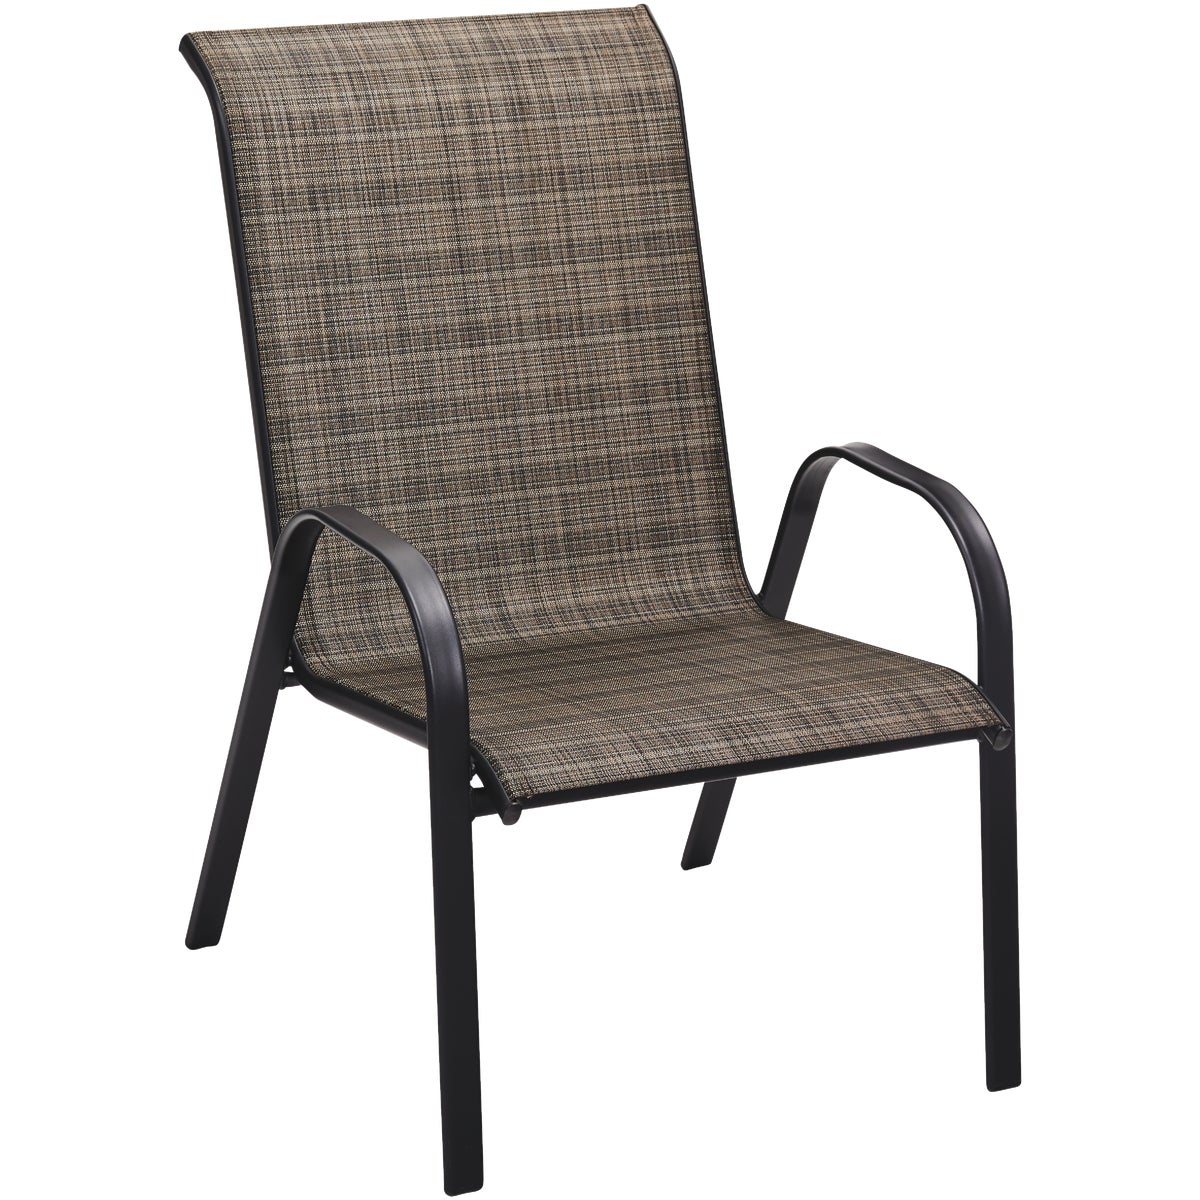 Outdoor Expressions Windsor Collection Black Steel Sling Oversized Stacking Chair